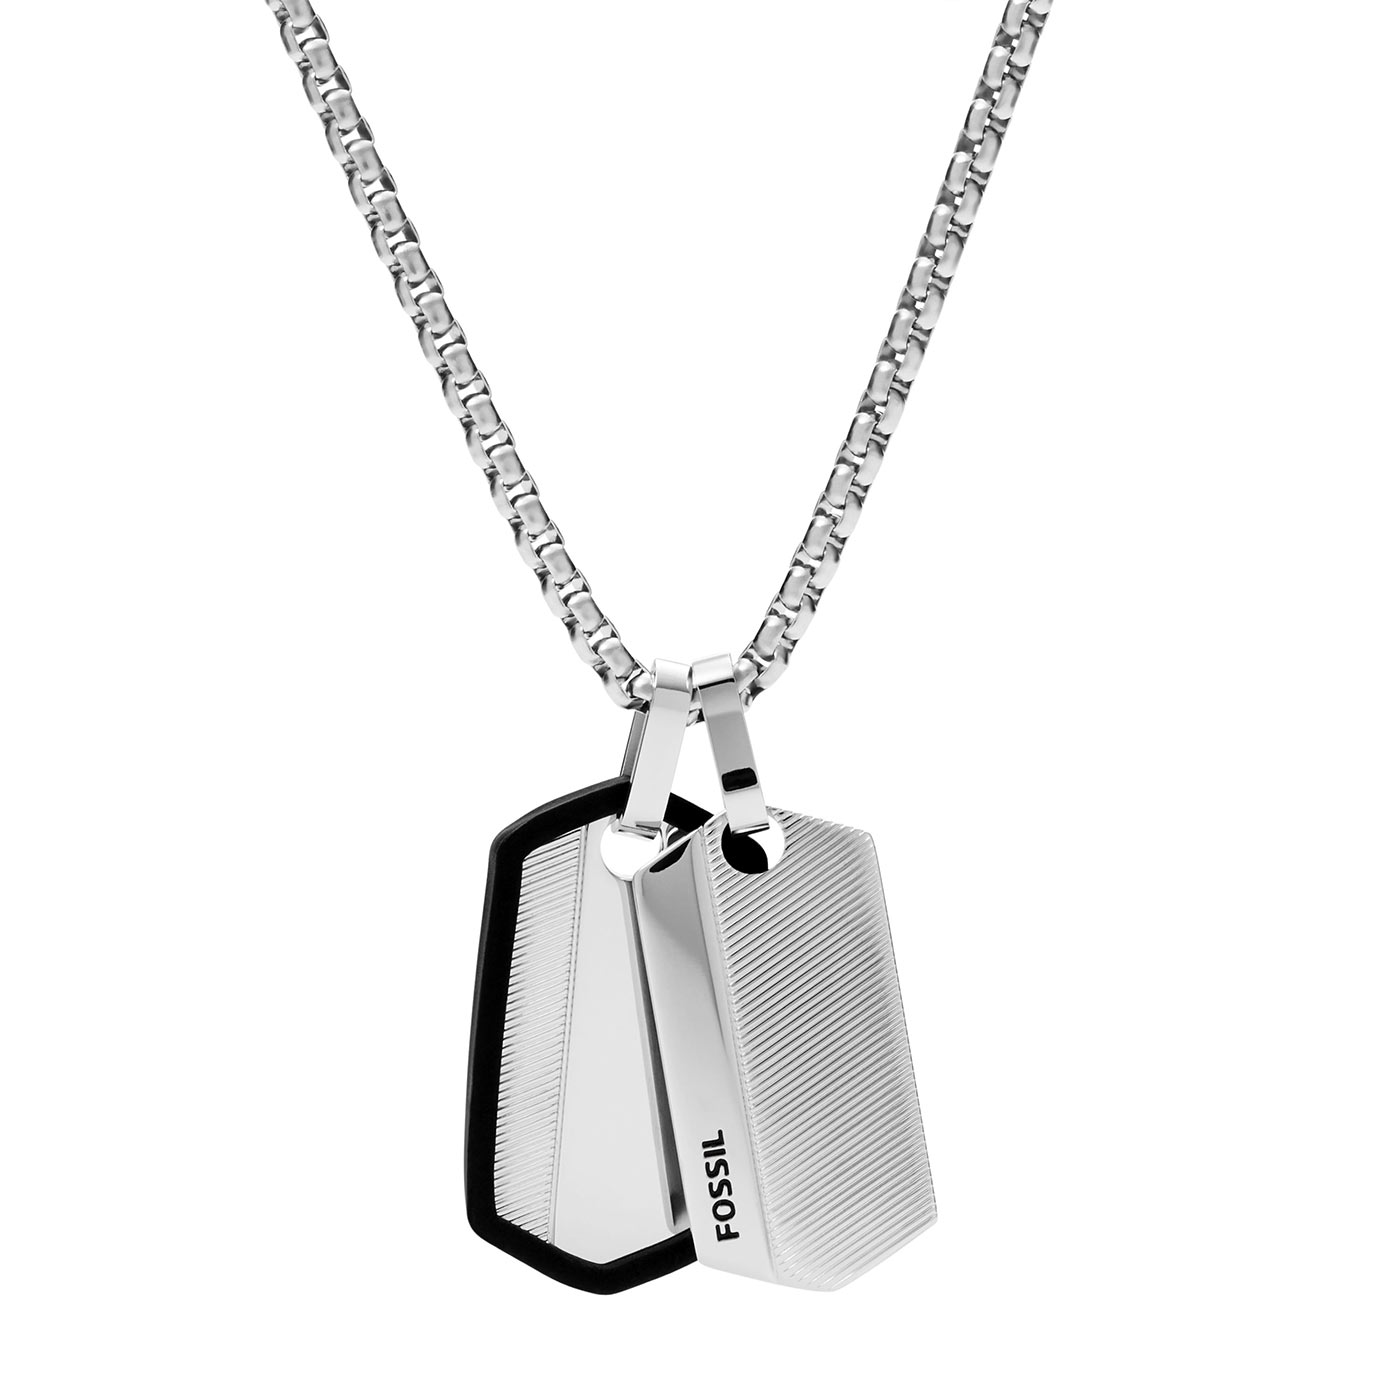 Chevron stainless steel Dog tag